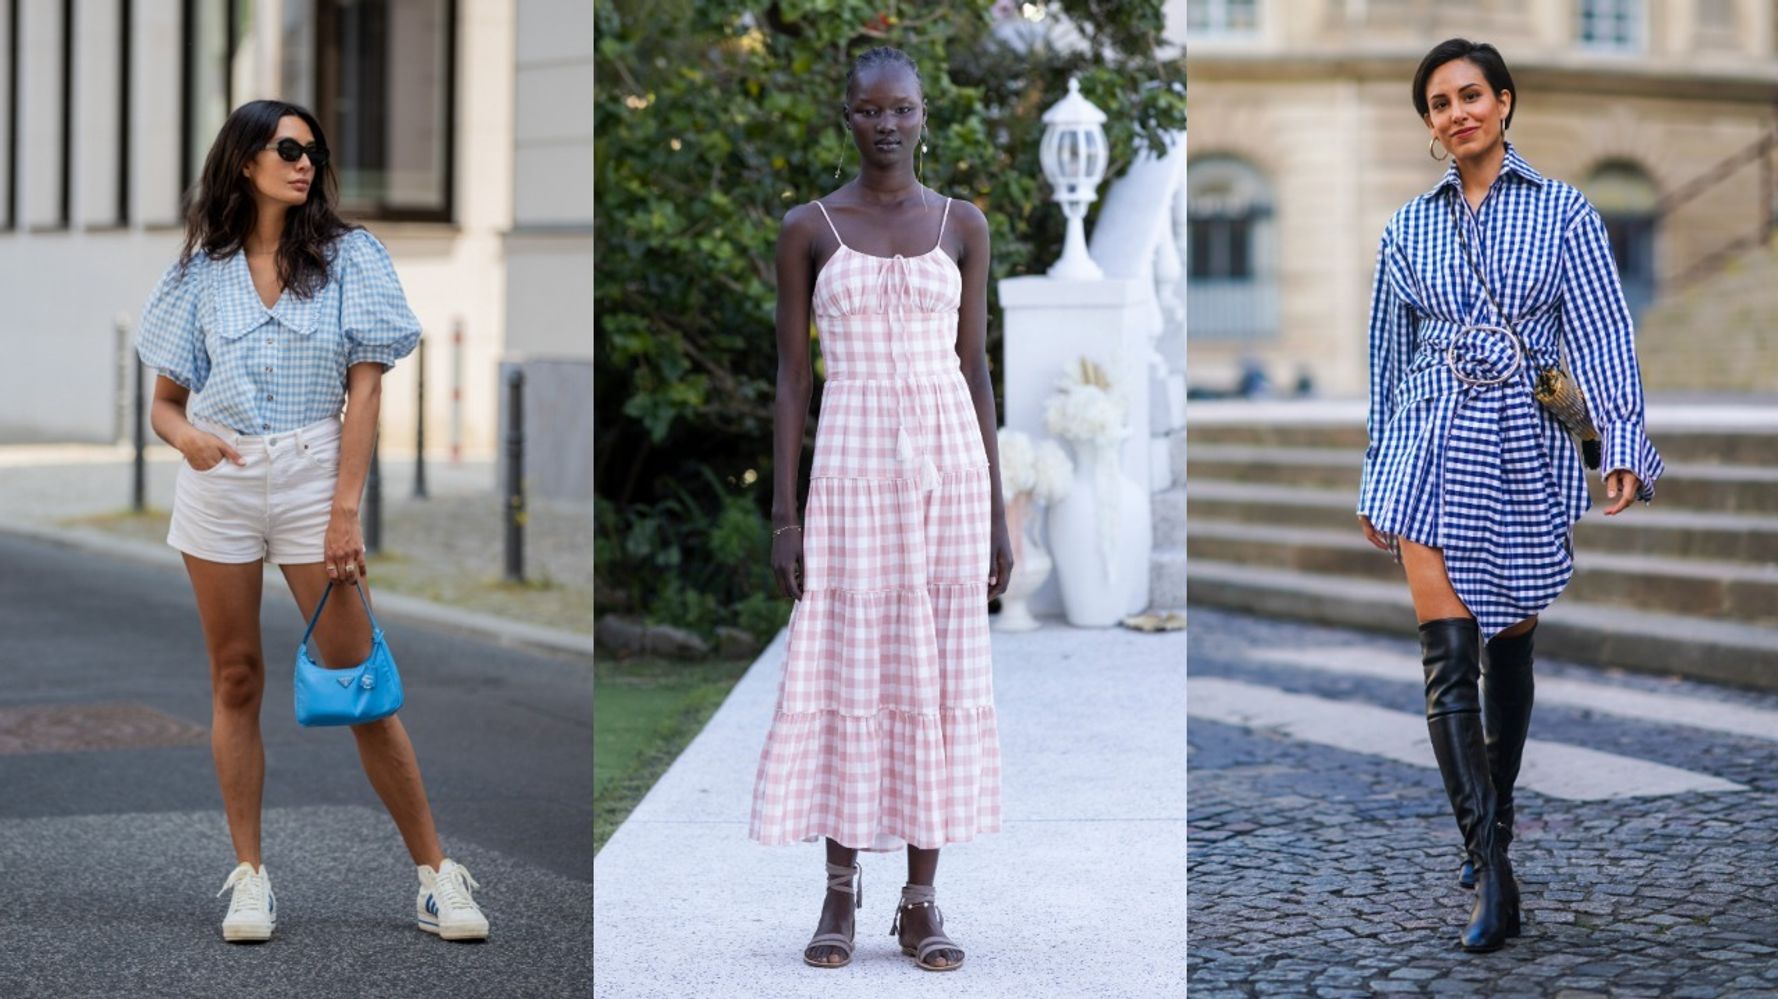 Shop The Trend: Checked Gingham Looks That'll Take You Through Summer